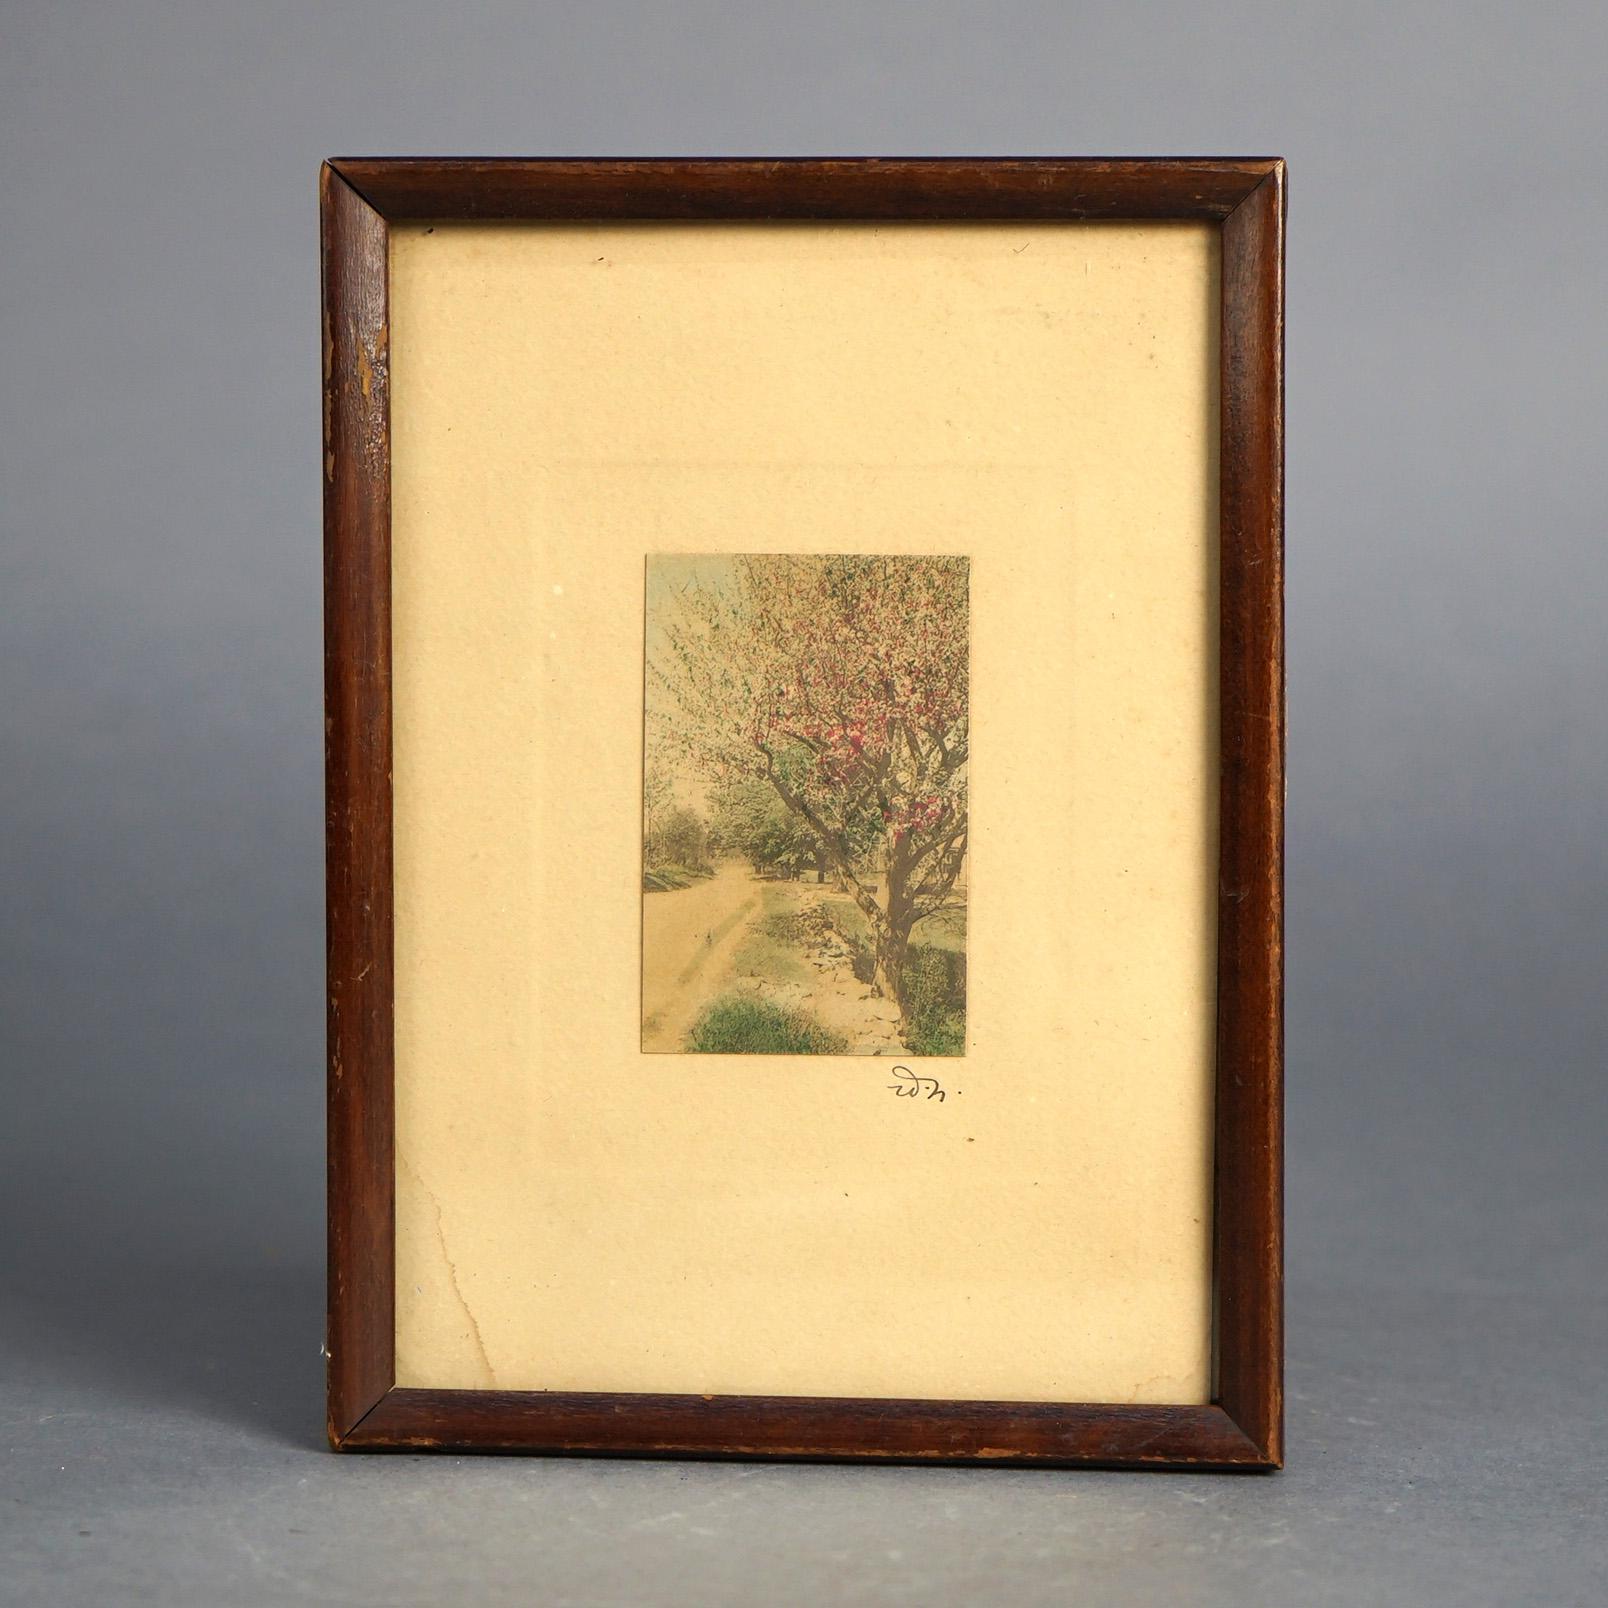 Three Antique Wallace Nutting Prints including Interior & Landscape Scenes C1920

Measures- Small (Tree): 7.75''H x 5.75''W x .5''D; Medium (Doorway with Blooms): 8.75''H x 10.75''W x 1''D; Tall (Gated Fence): 12.75''H x 8.75''W x 1.25''D